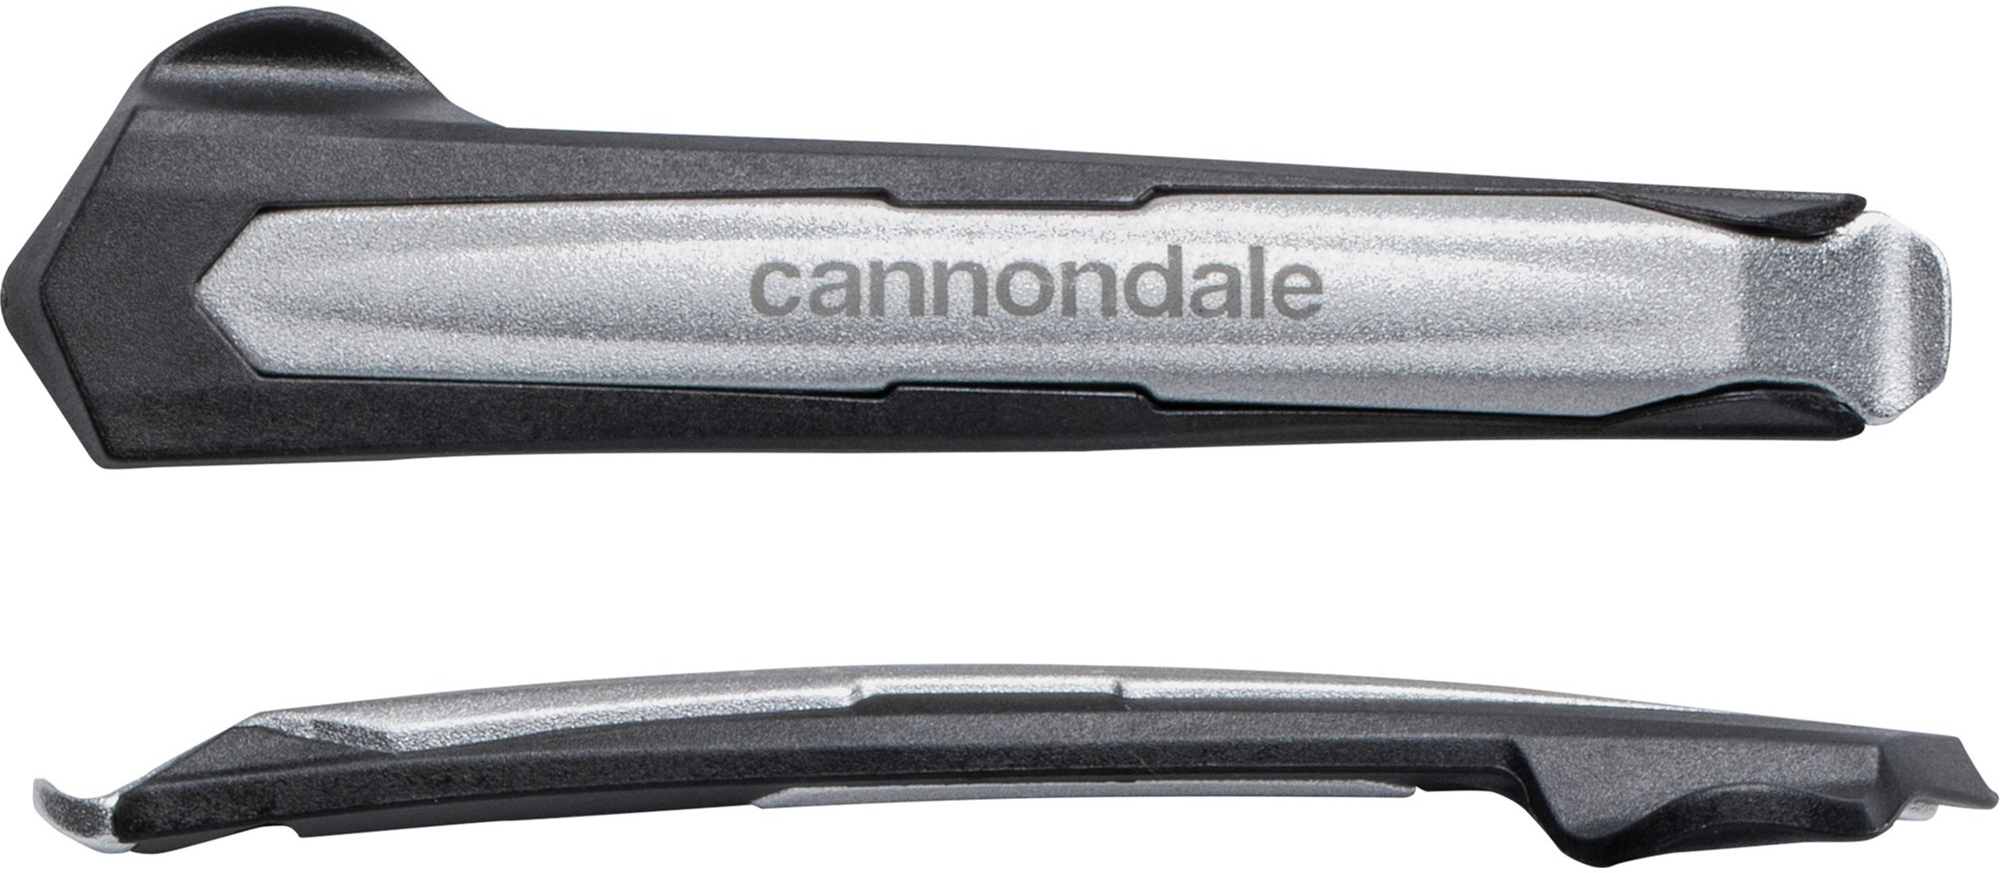 Cannondale  PriBar Tire Levers in Black -